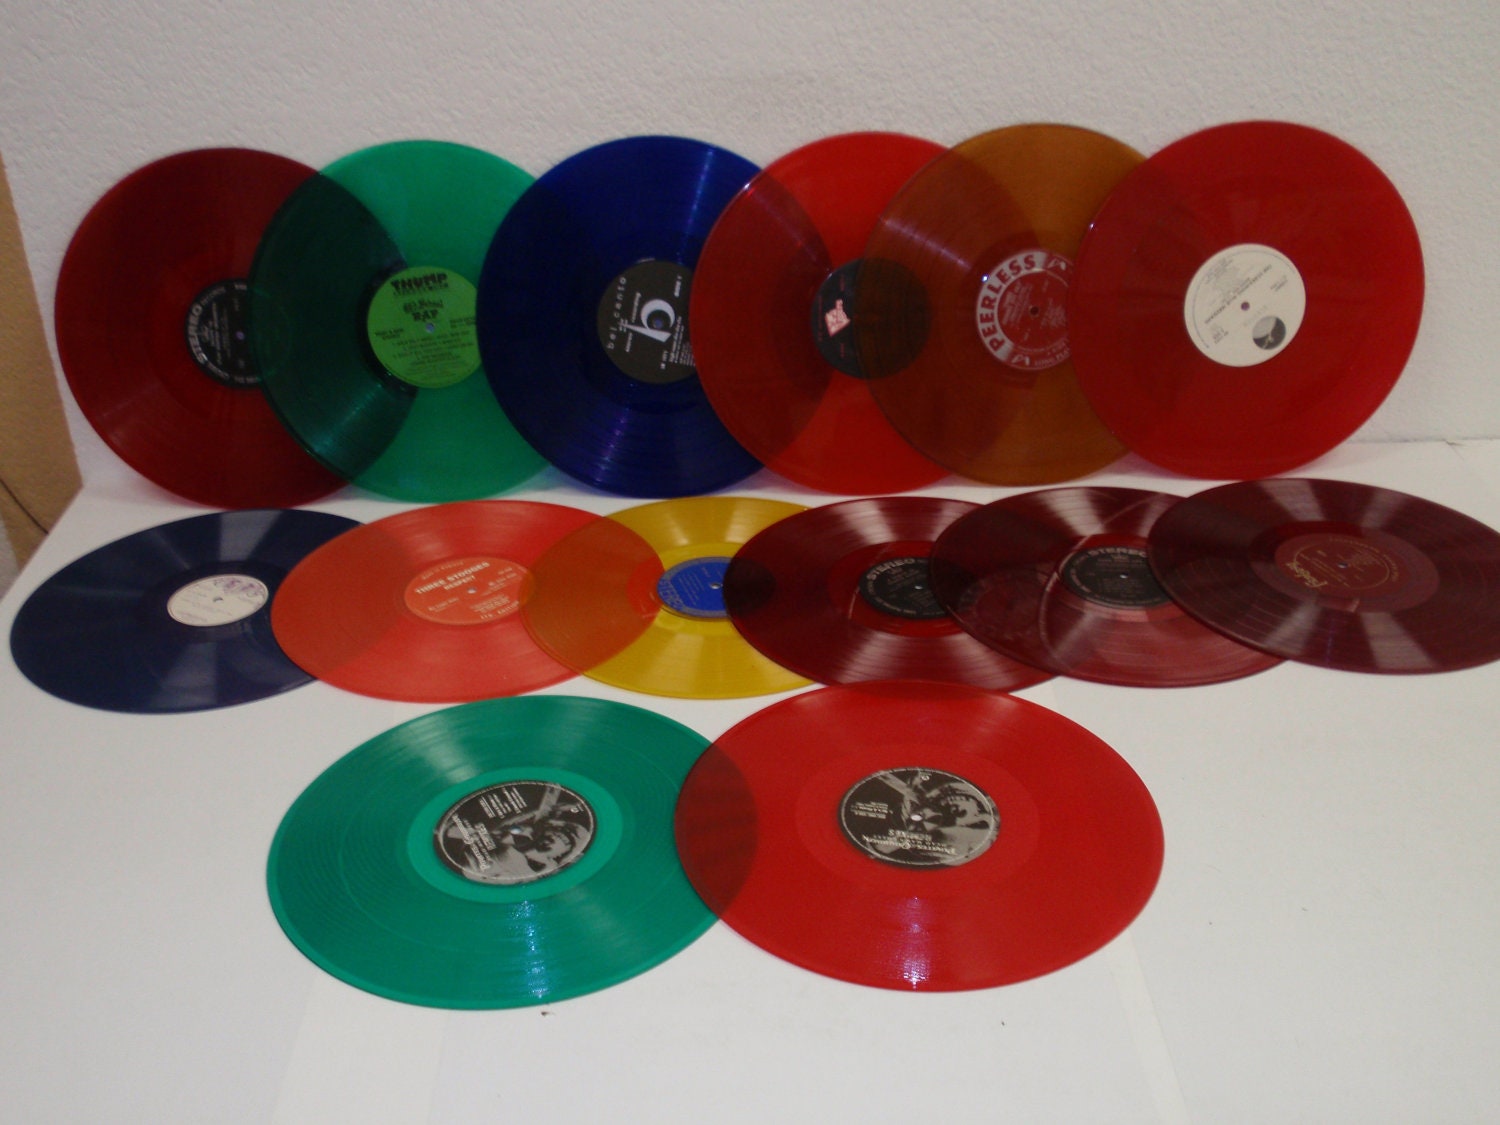 Download COLORED VINYL Used Vinyl Record Albums For Crafting Crafting